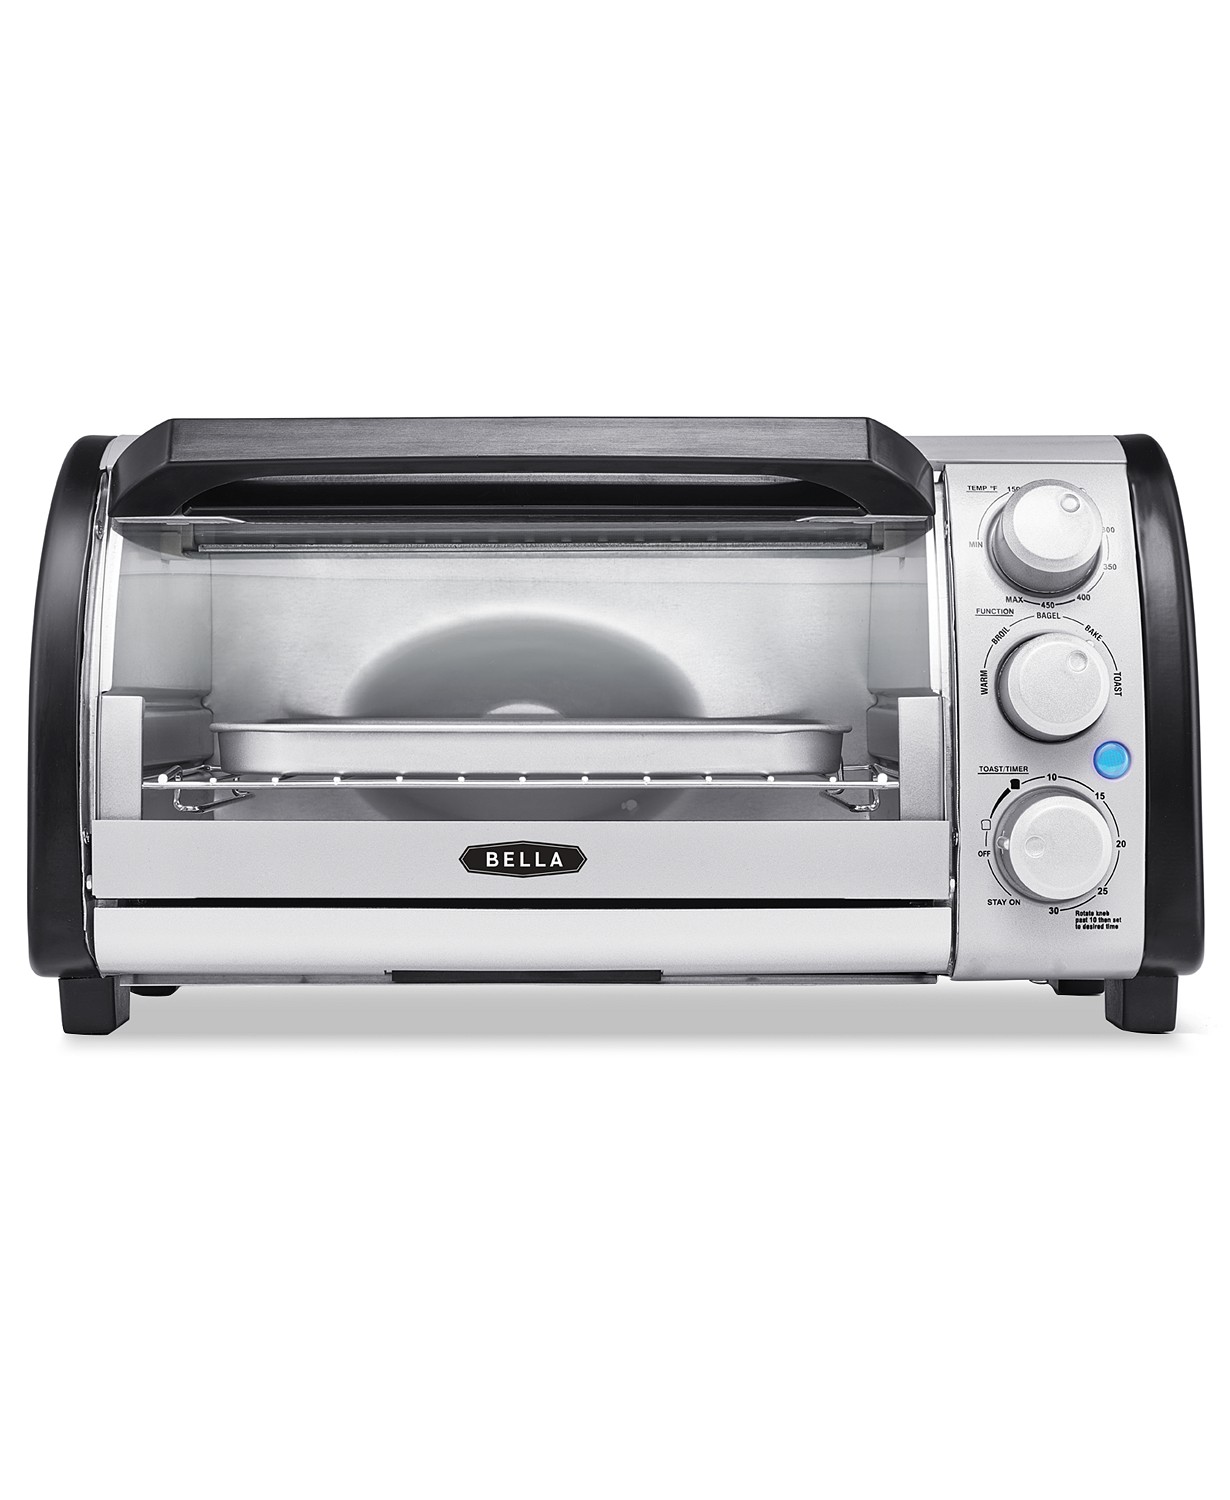 Bella Toaster Oven Mail In Rebate